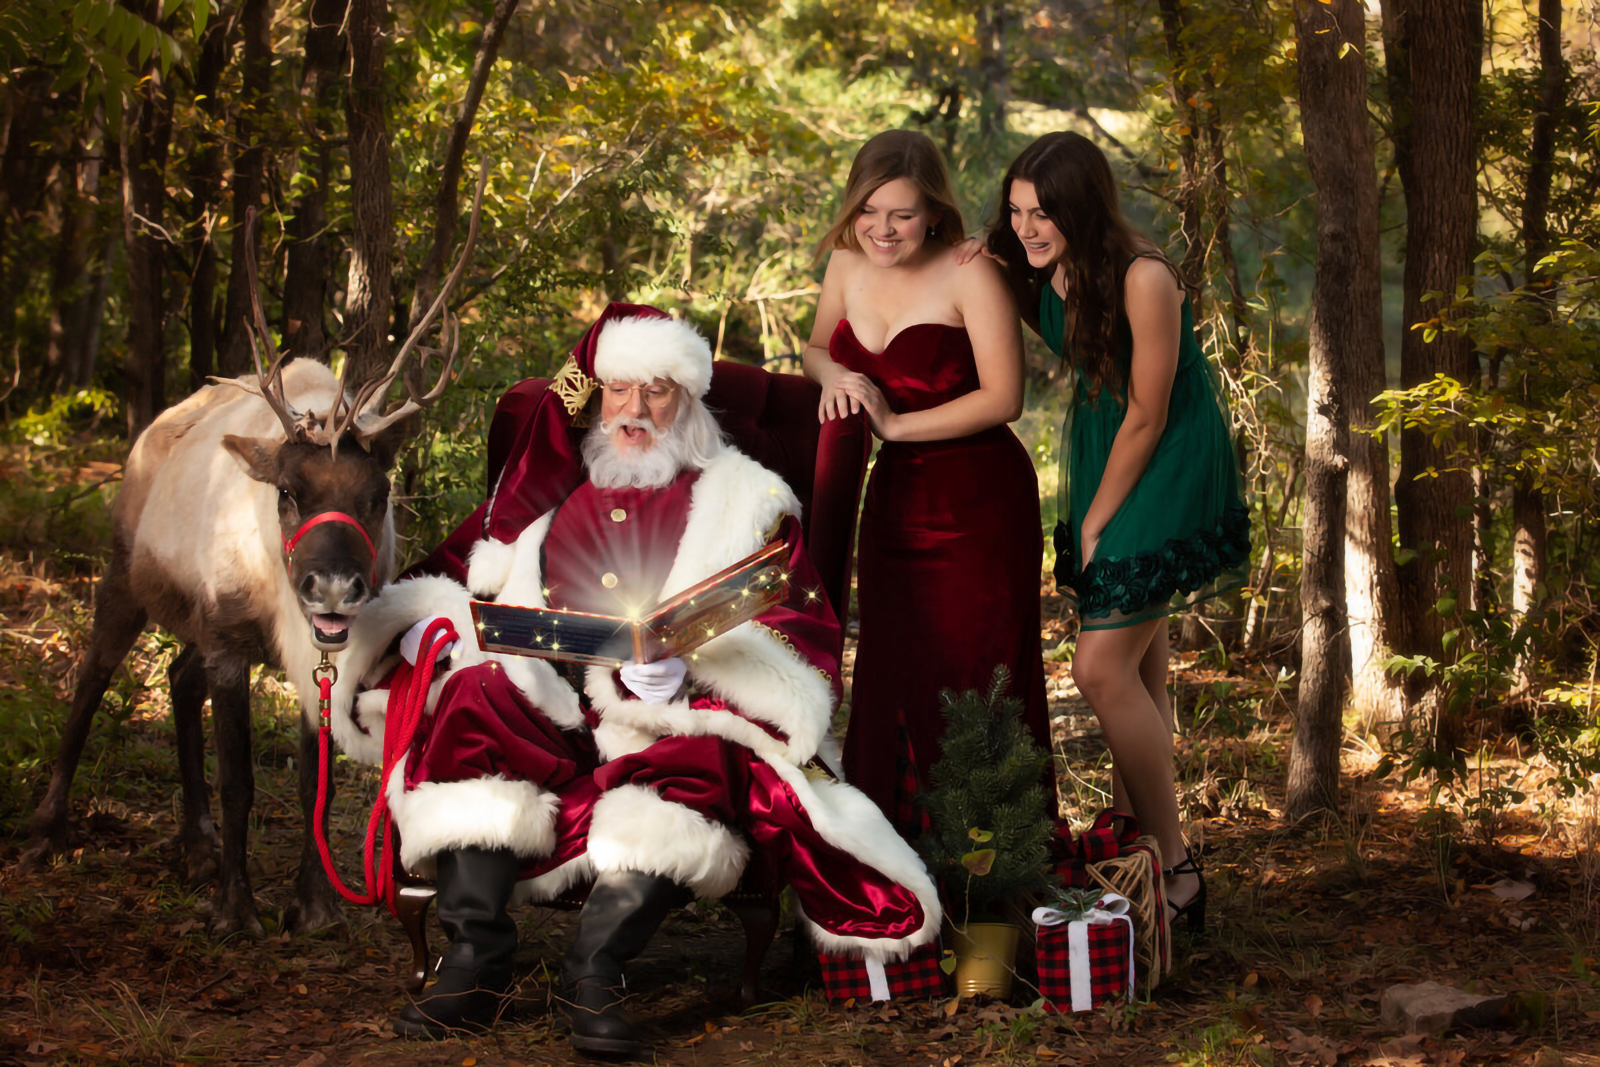 Girls with Santa Claus and Reindeer reading magical book